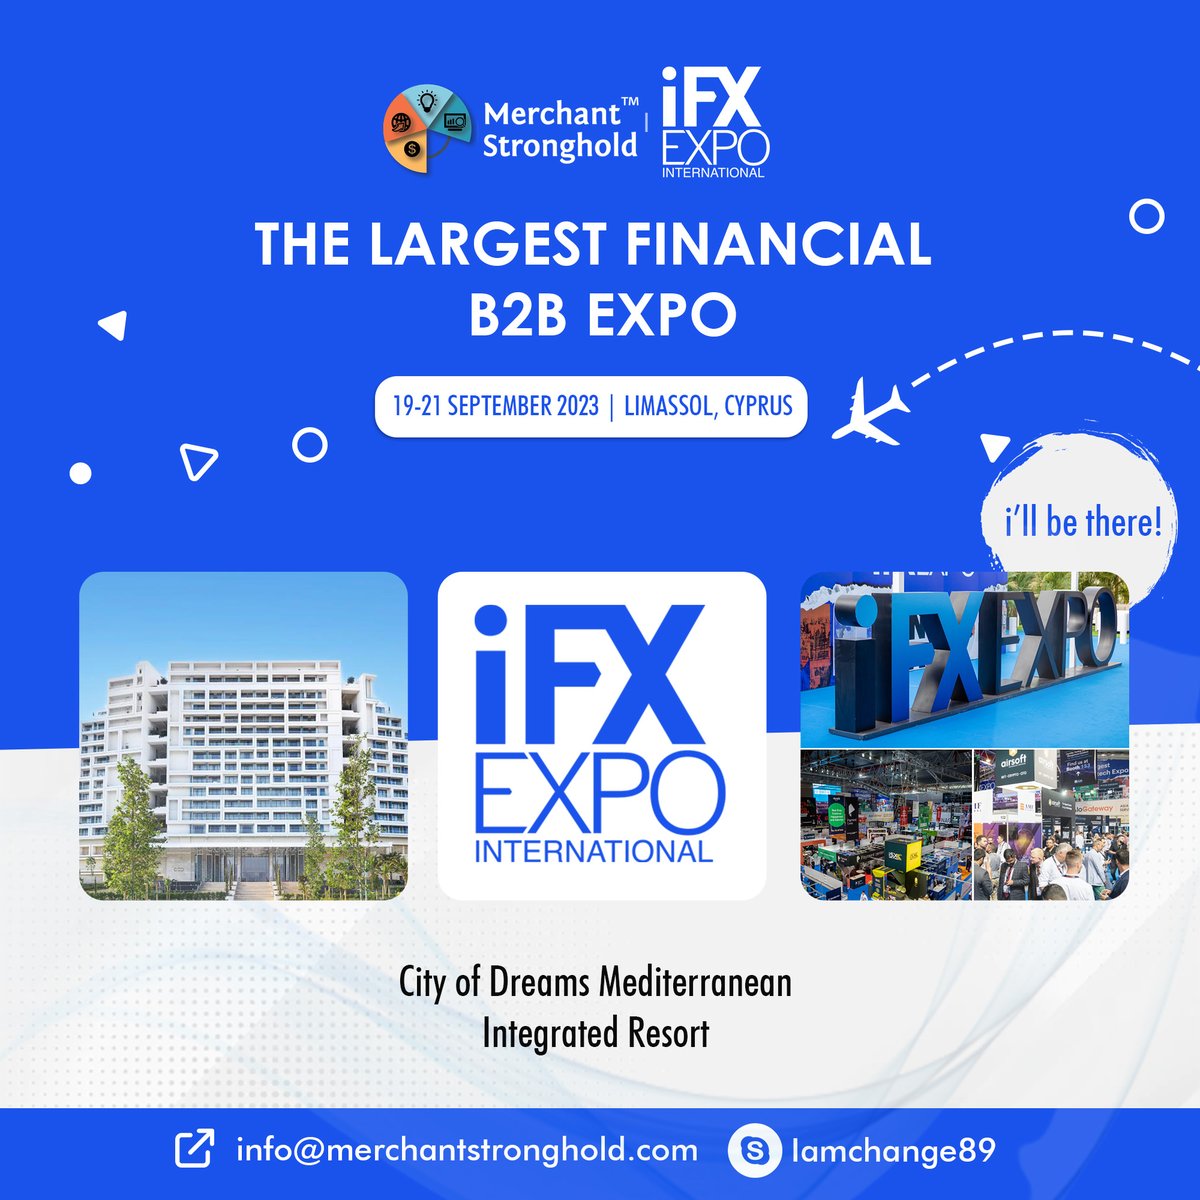 We are so excited to be in Limassol Cyprus IFX EXPO 2023!

Email: info@merchantstronghold.com,
Skype: iamchange89,
Phone No. +1 (727) 330-3944
.
.
#iFXEXPOInternational2023 #iFXEXPO #iFXTALKS #B2Bevent #Networking #Business #Finance #B2BMarketing #Exhibitions #EventsIndustry